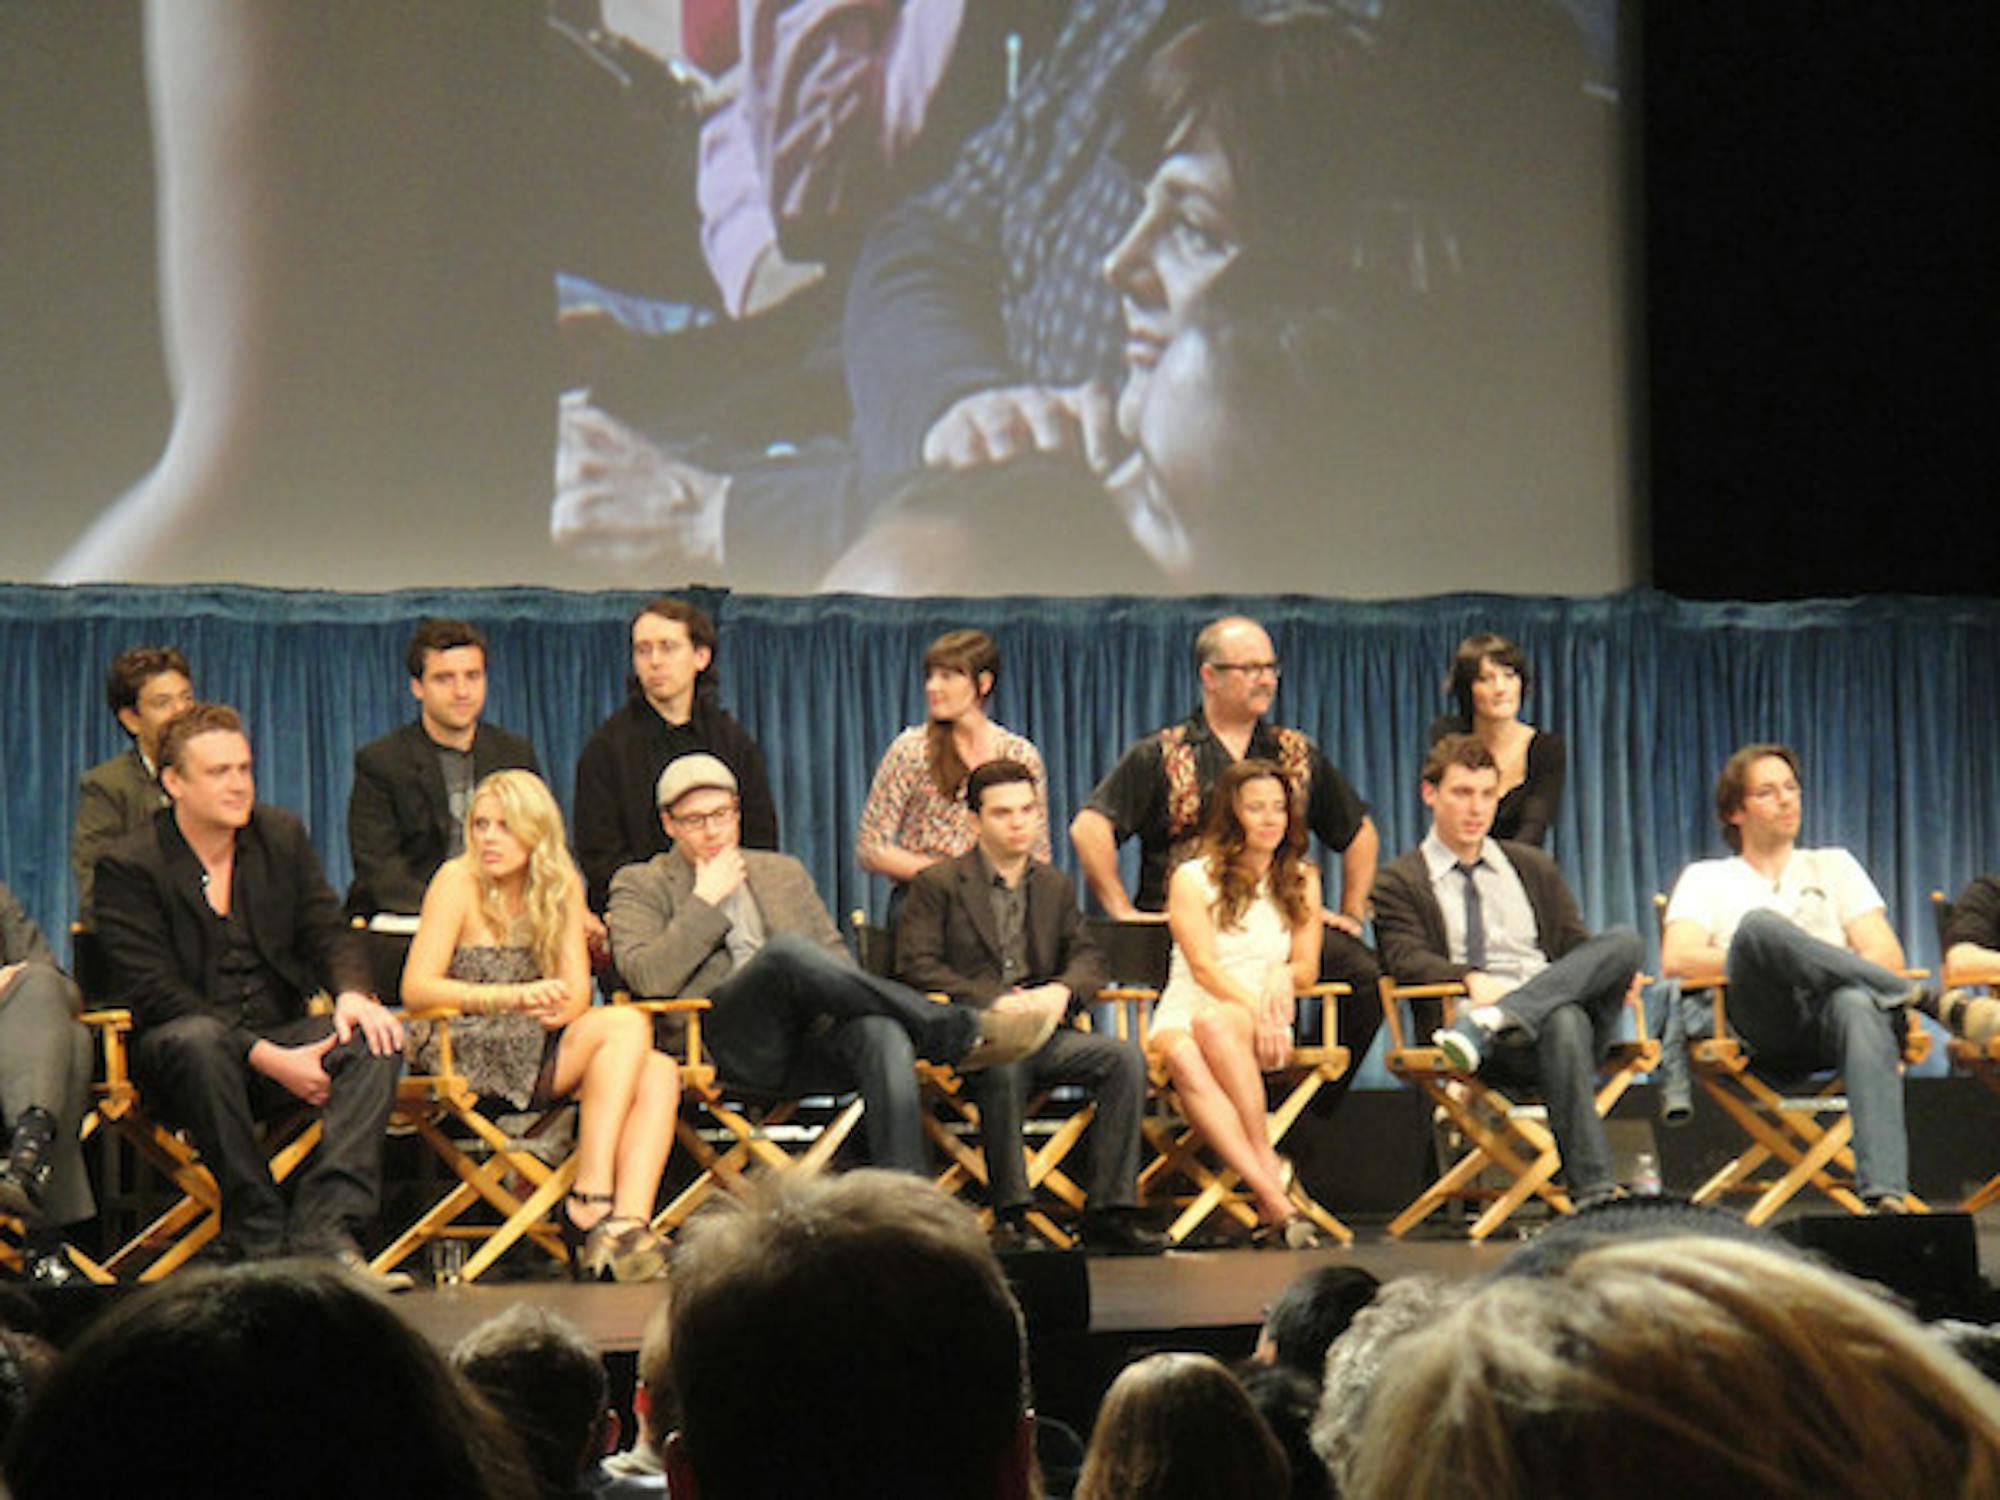 PaleyFest_2011_-_Freaks_and_Geeks_Reunion_-_the_cast_5524463815